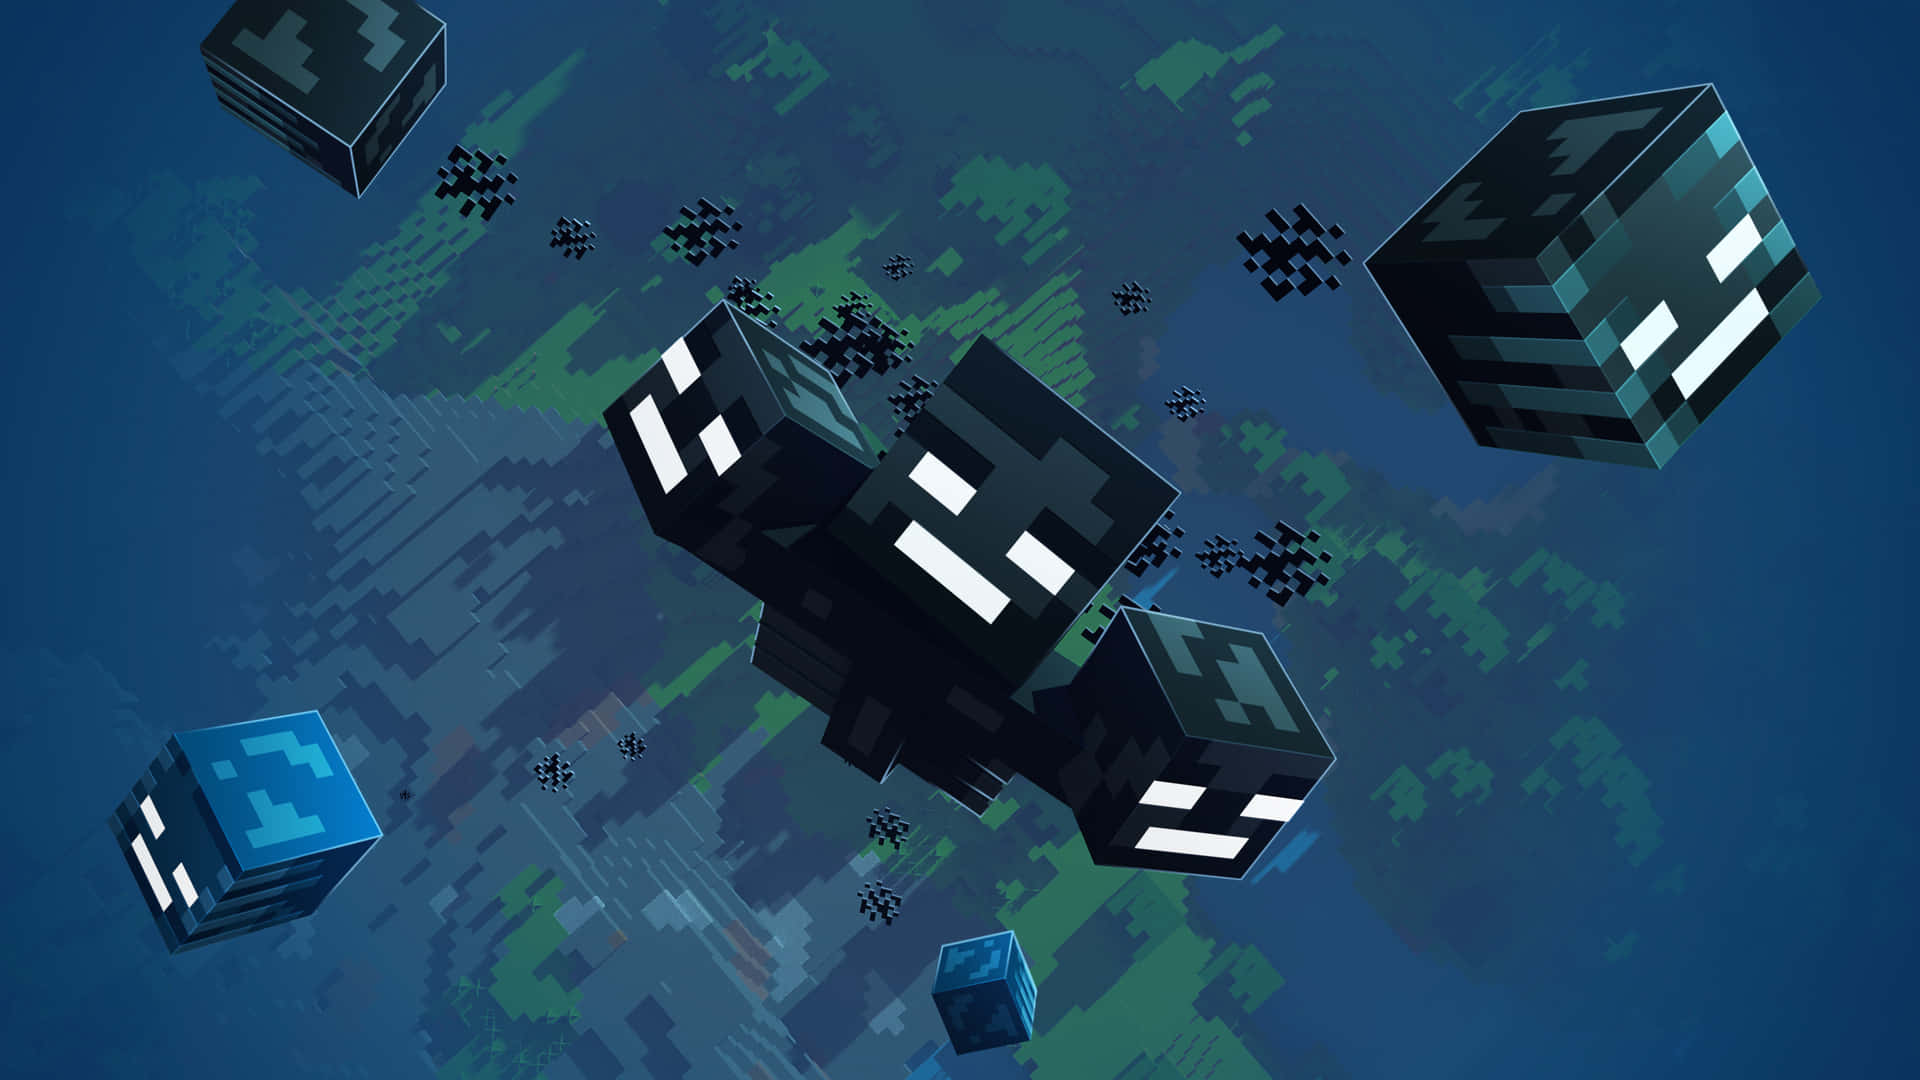 Minecraft Wither Boss showdown in the Nether Wallpaper